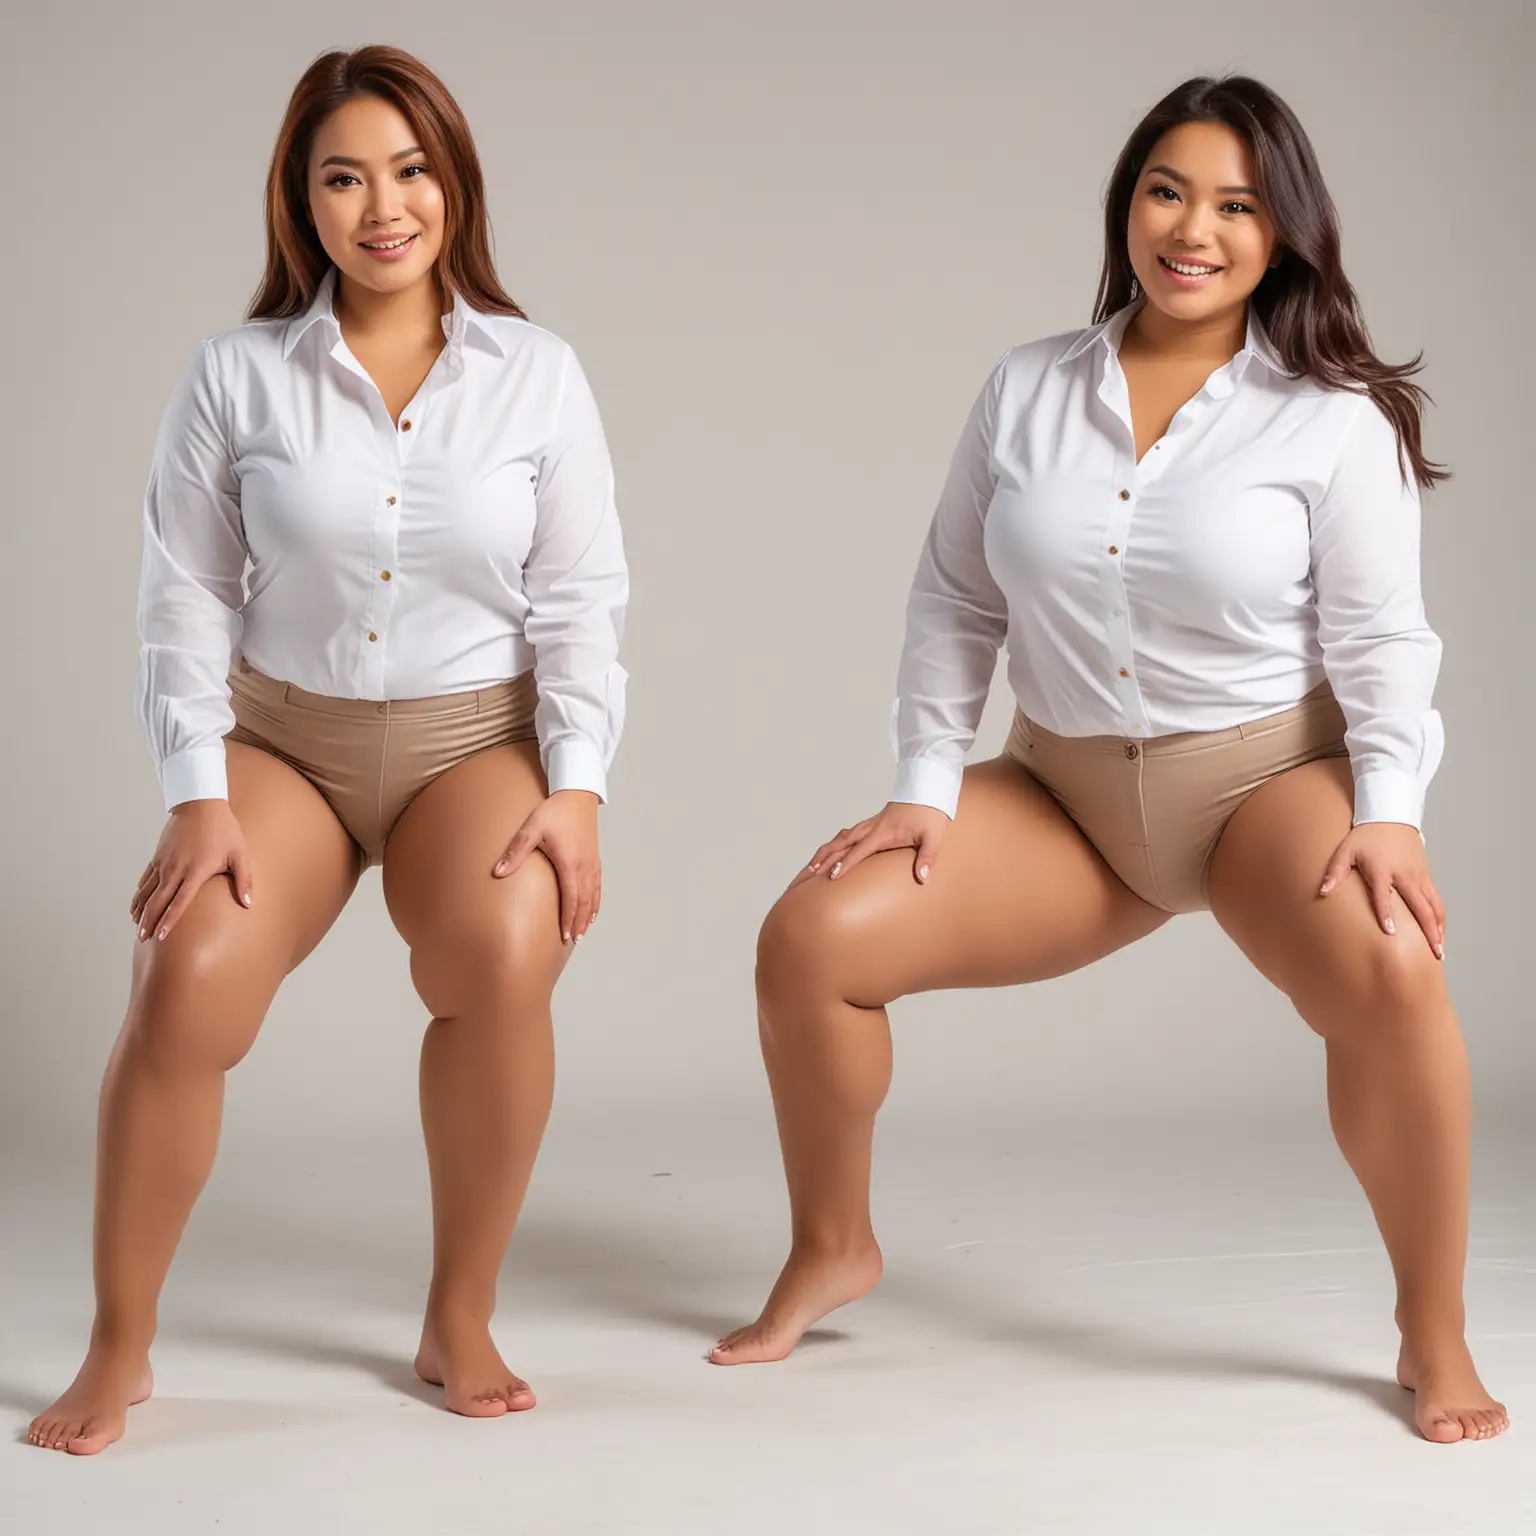 Two Curvy Beautiful Filipino Women, wearing tan pantyhose, no shoes, no skirt or pants, with untucked stretch white button down shirts, do squat exercises with each other.